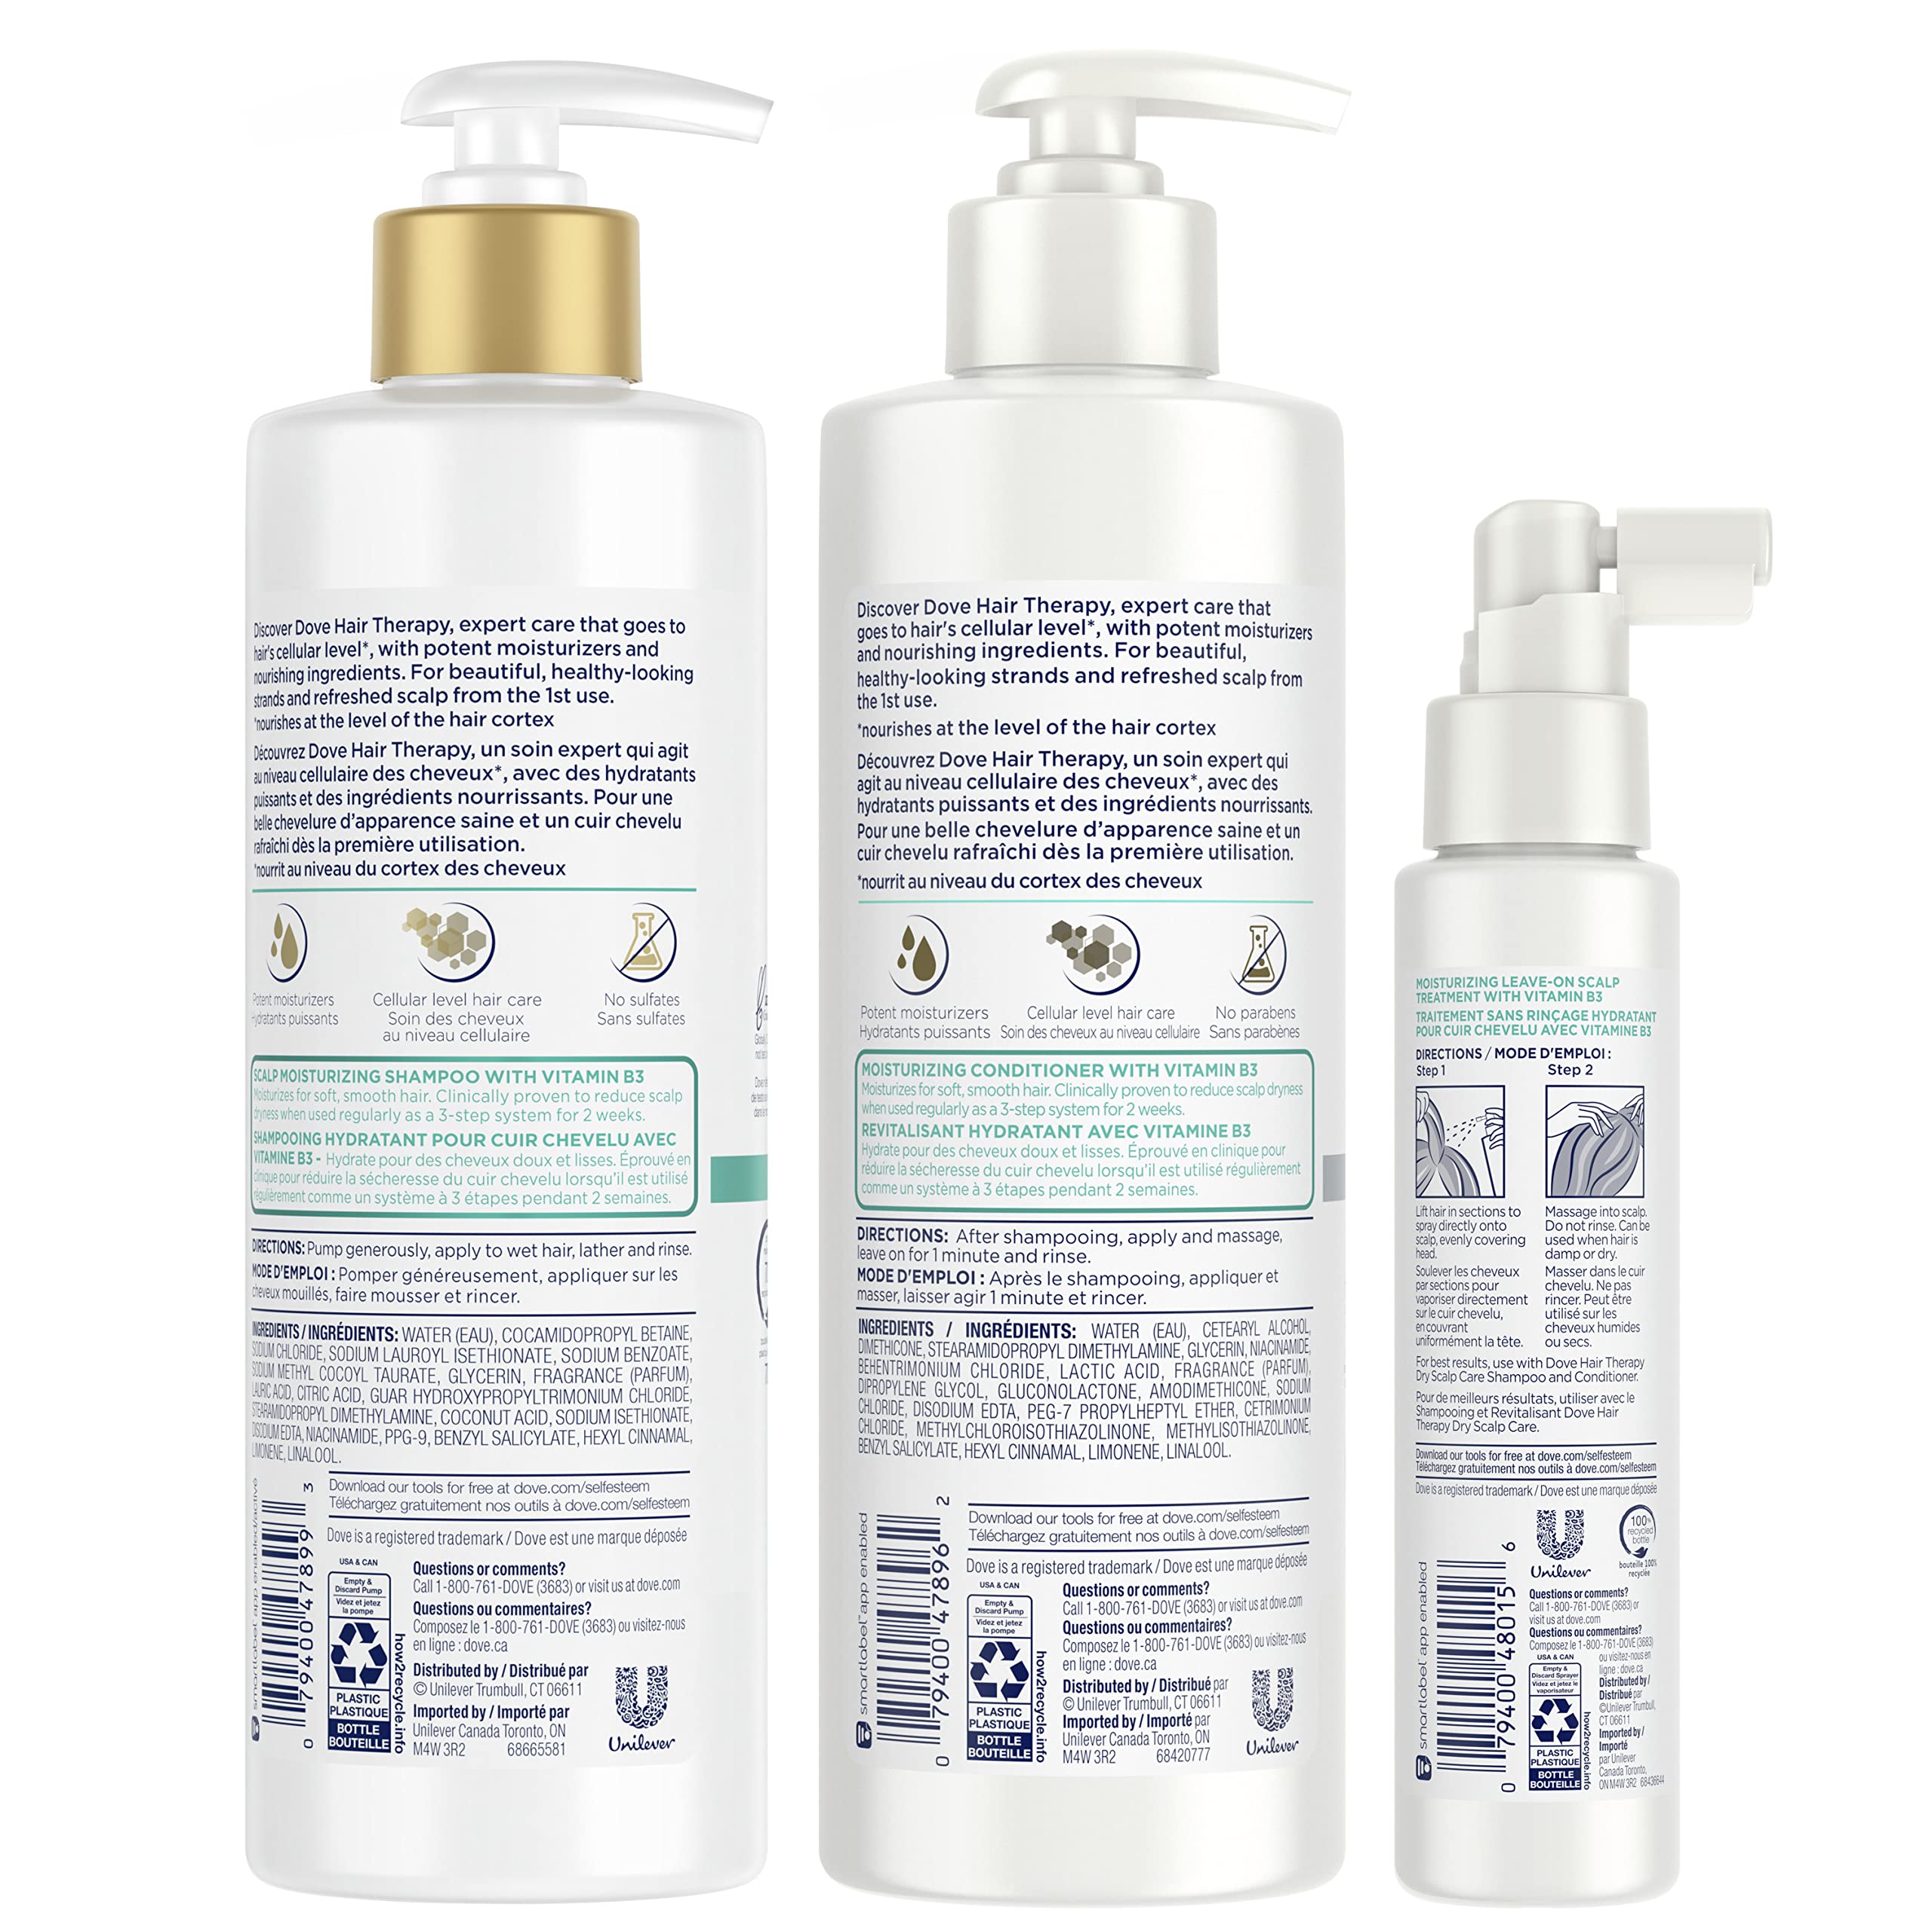 Dove Hair Therapy Regimen Hair Set Shampoo, Conditioner and Leave-On Scalp Treatment for Dry Scalp with Vitamin B3